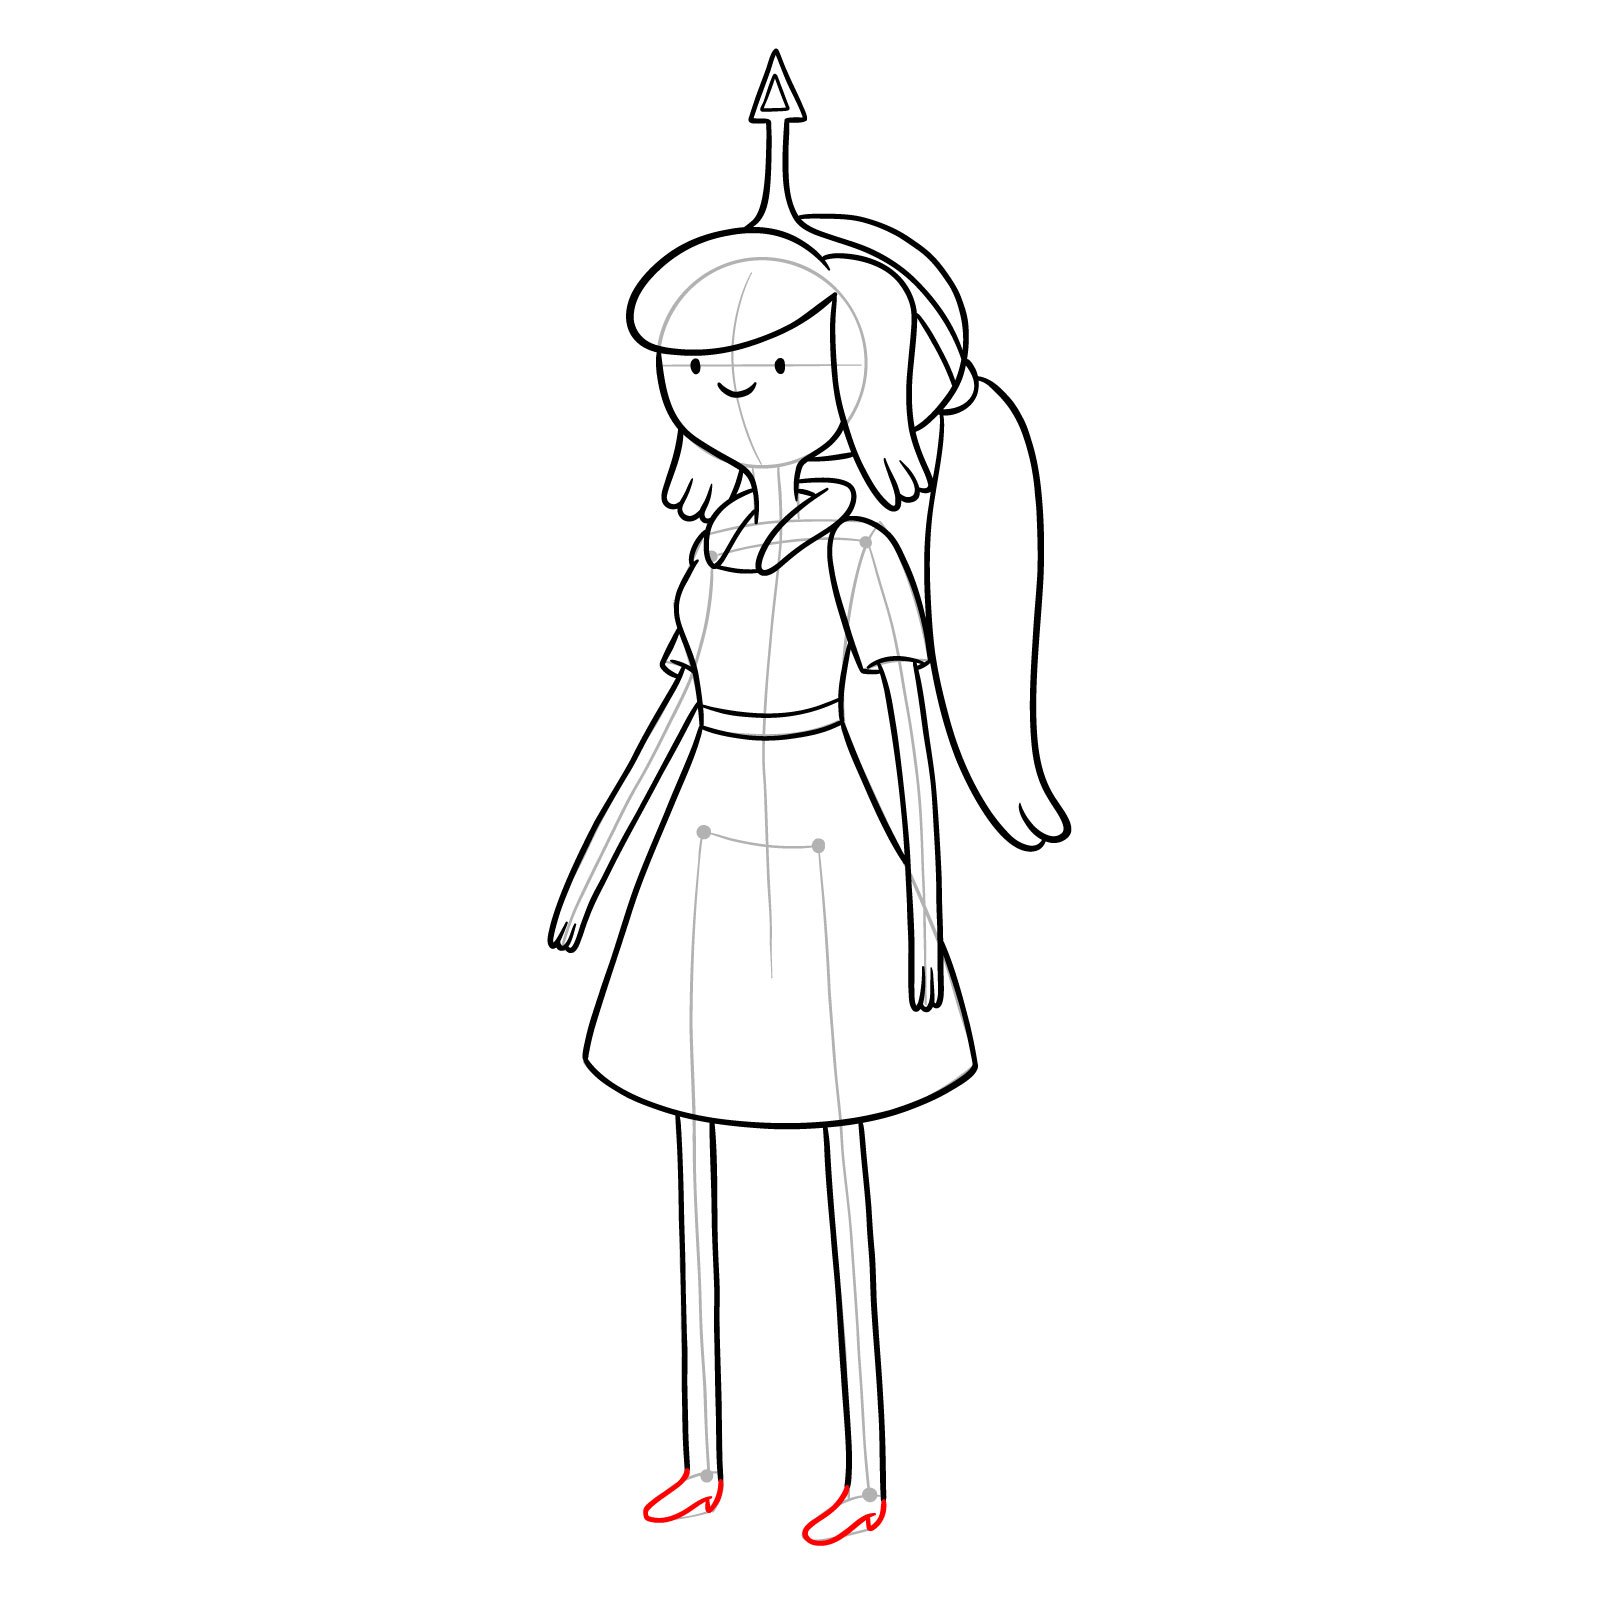 How to draw Princess Chewypaste from Adventure Time - step 21